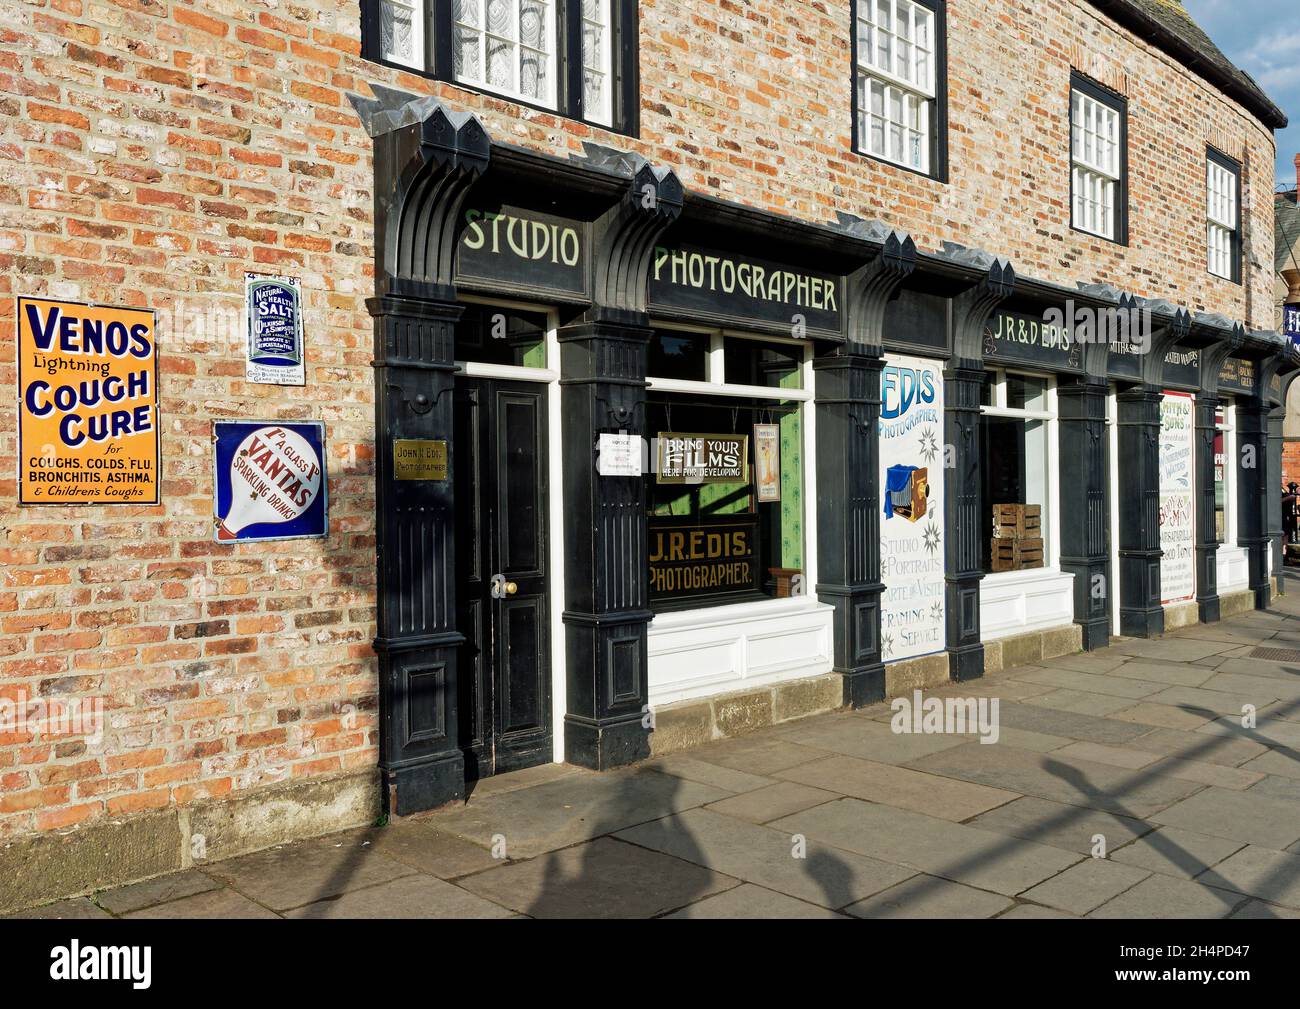 Shop buildings in the wonderful 1900's town at Beamish Museum - chemists shop with photography studio. Stock Photo